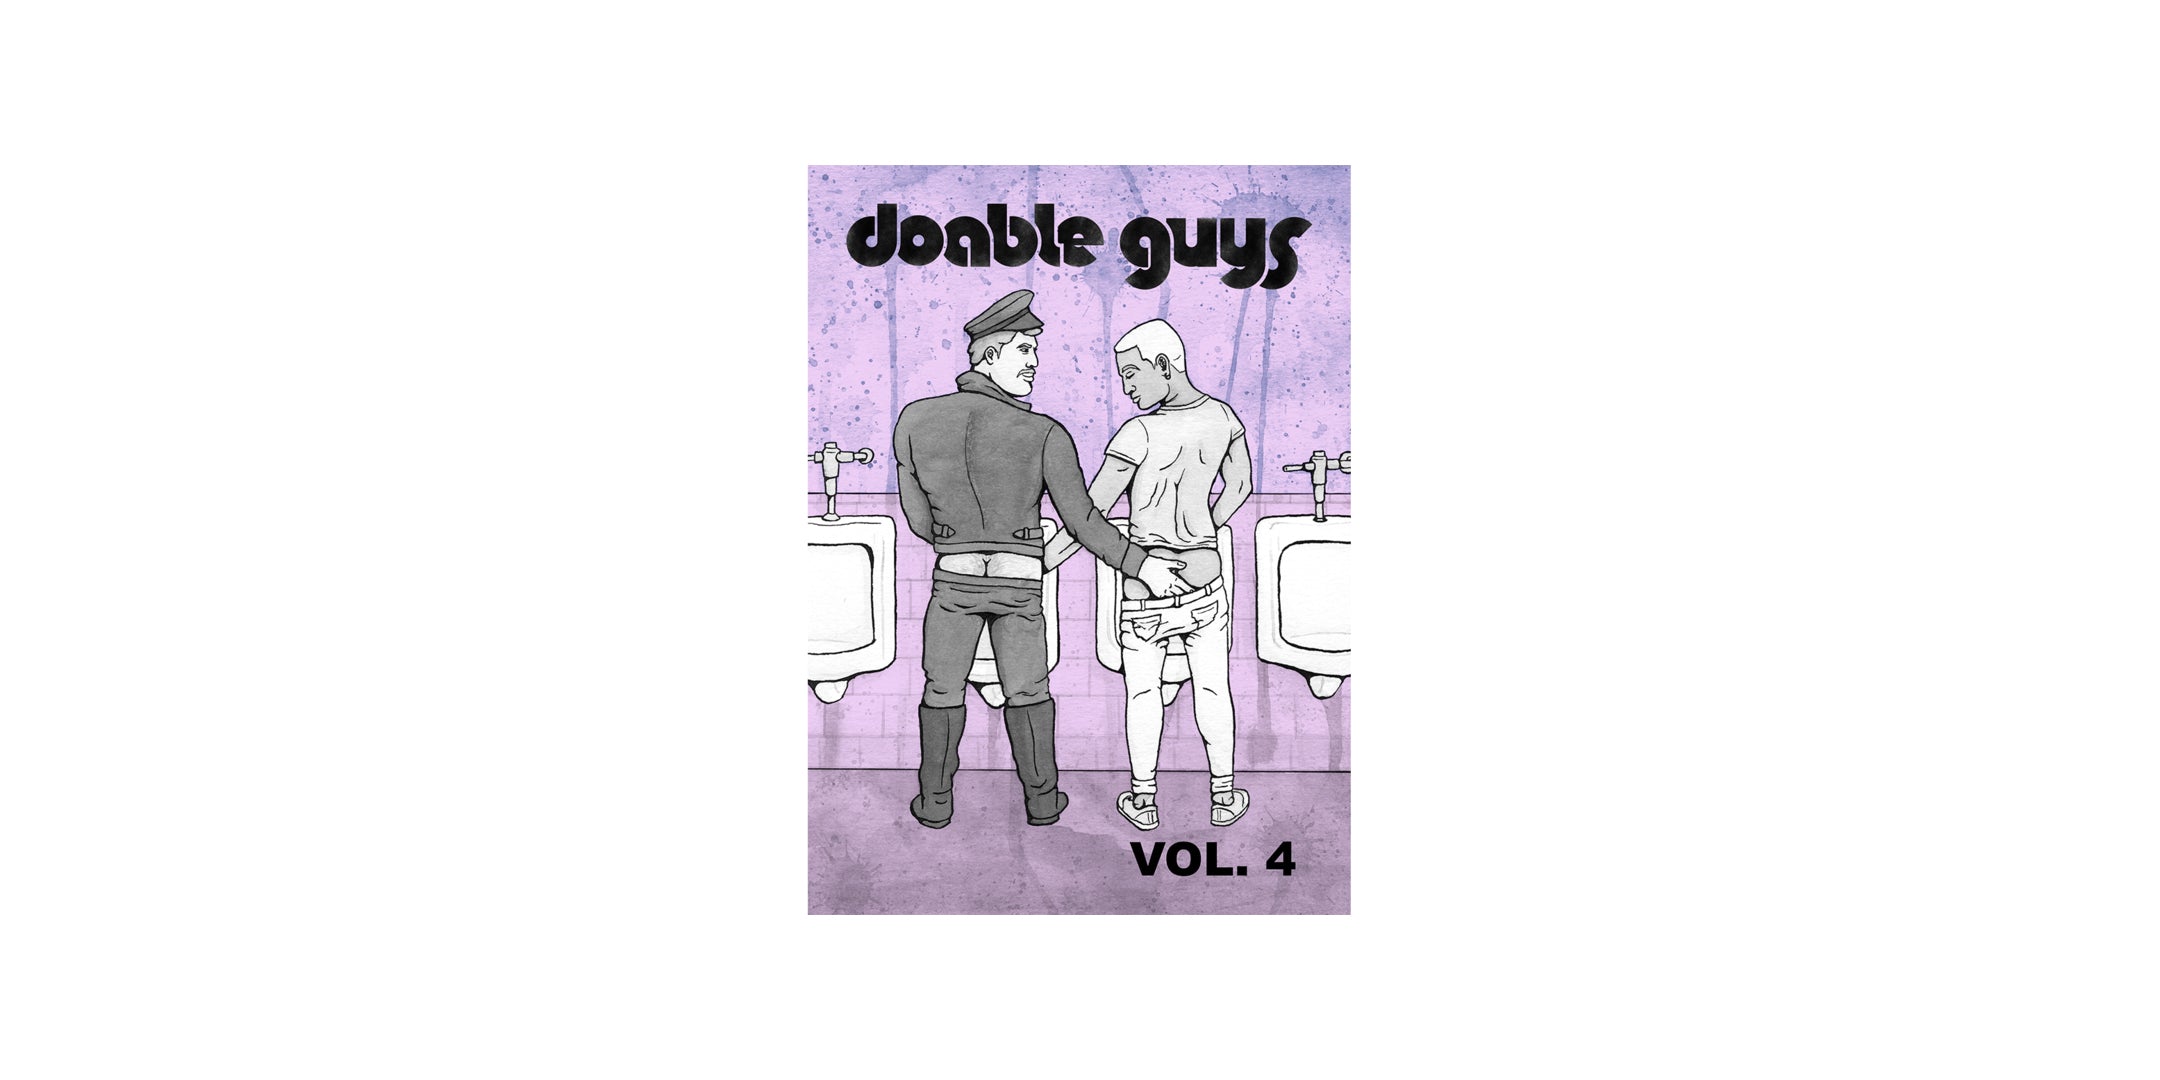 Doable Guys Vol. 4